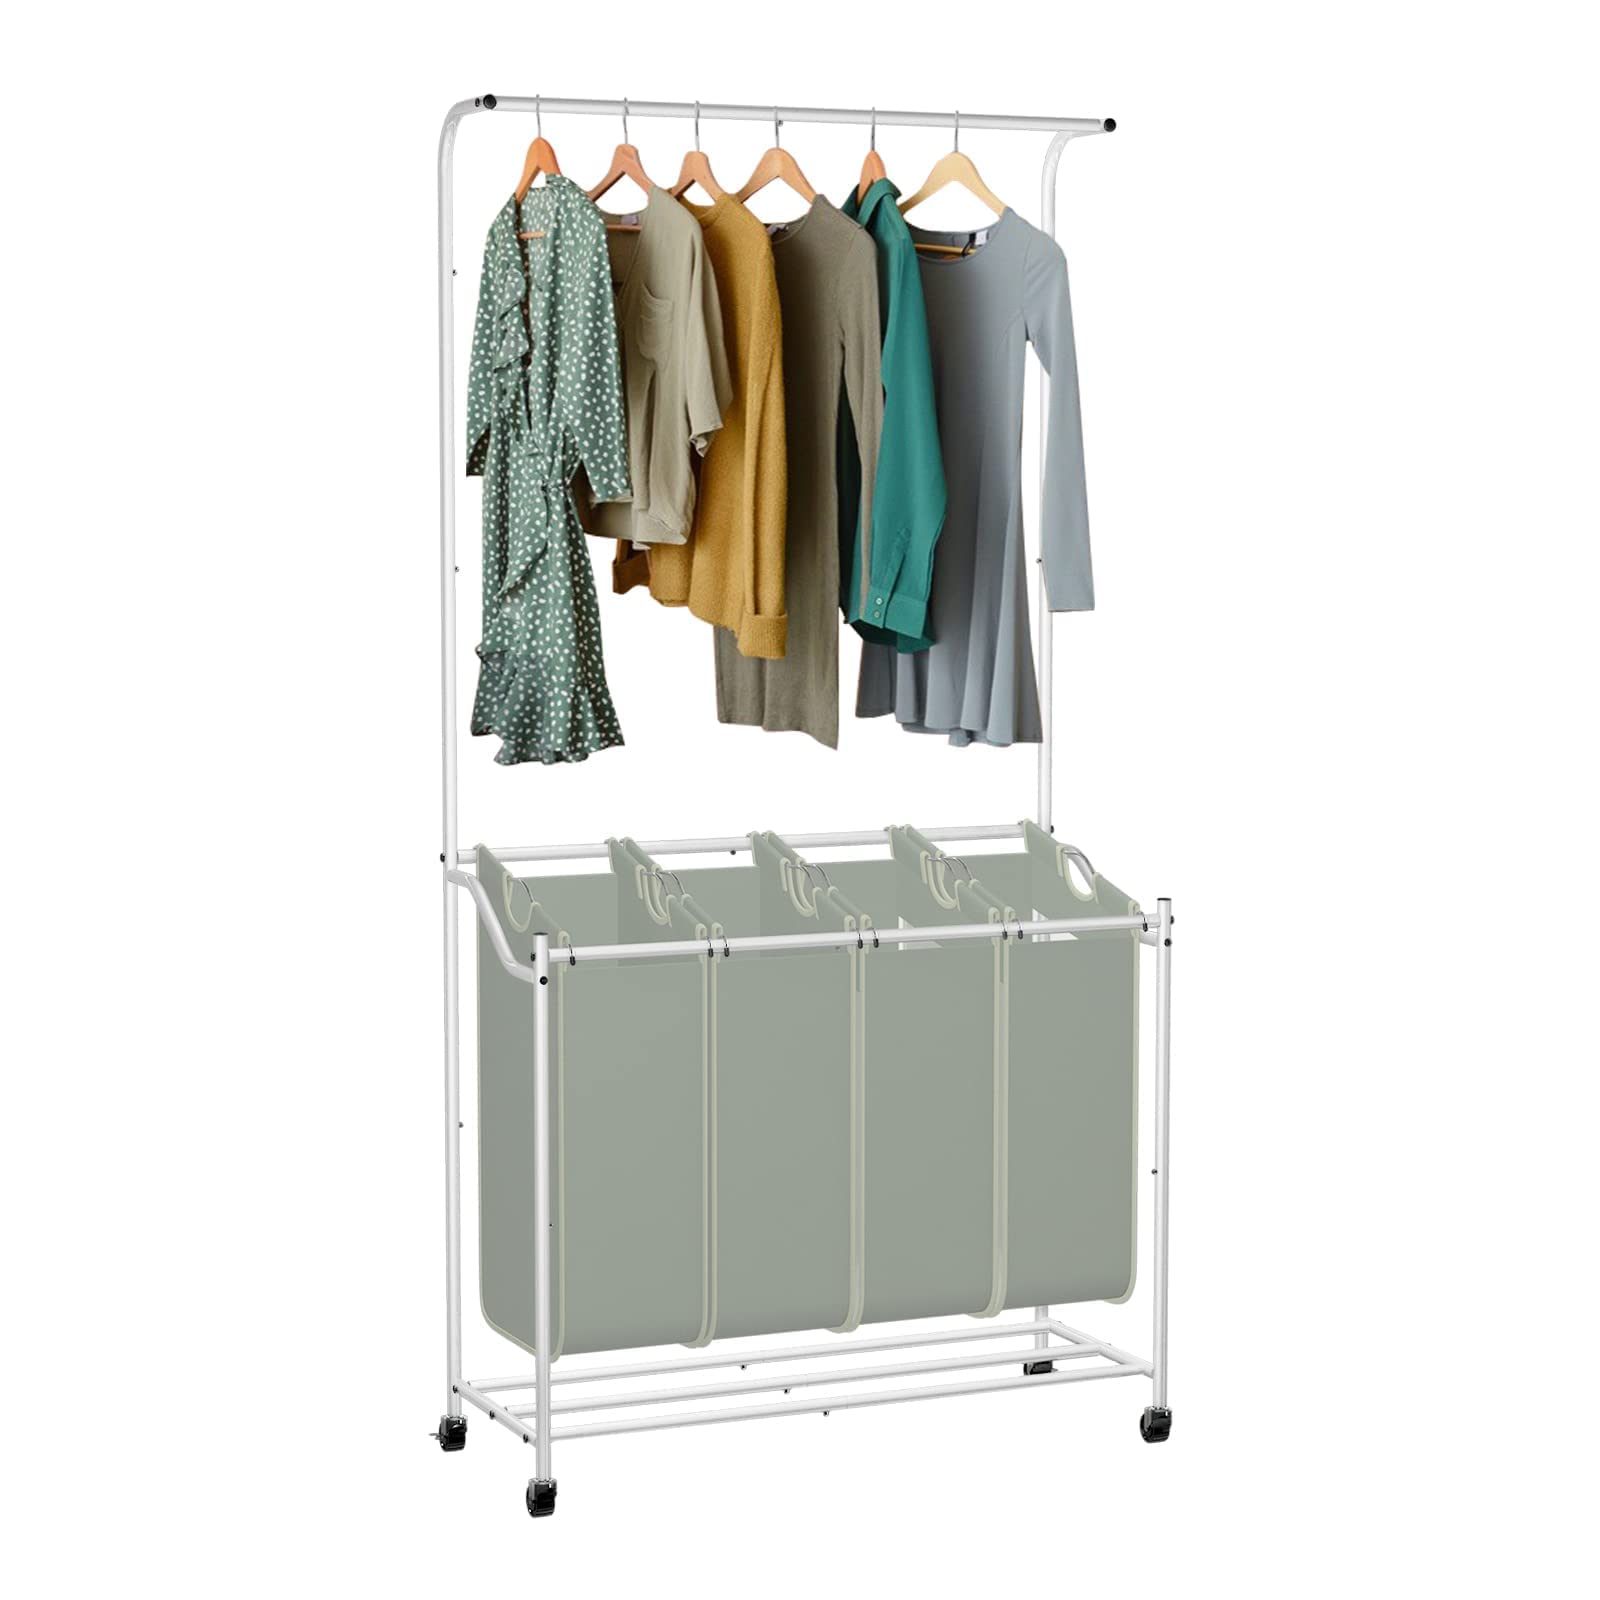 HIDODO Laundry Sorter 4 Sections, Rolling Laundry Sorter Cart with Hanging Bar, Laundry Organizer Hampers for Laundry Room (Greyish Green)